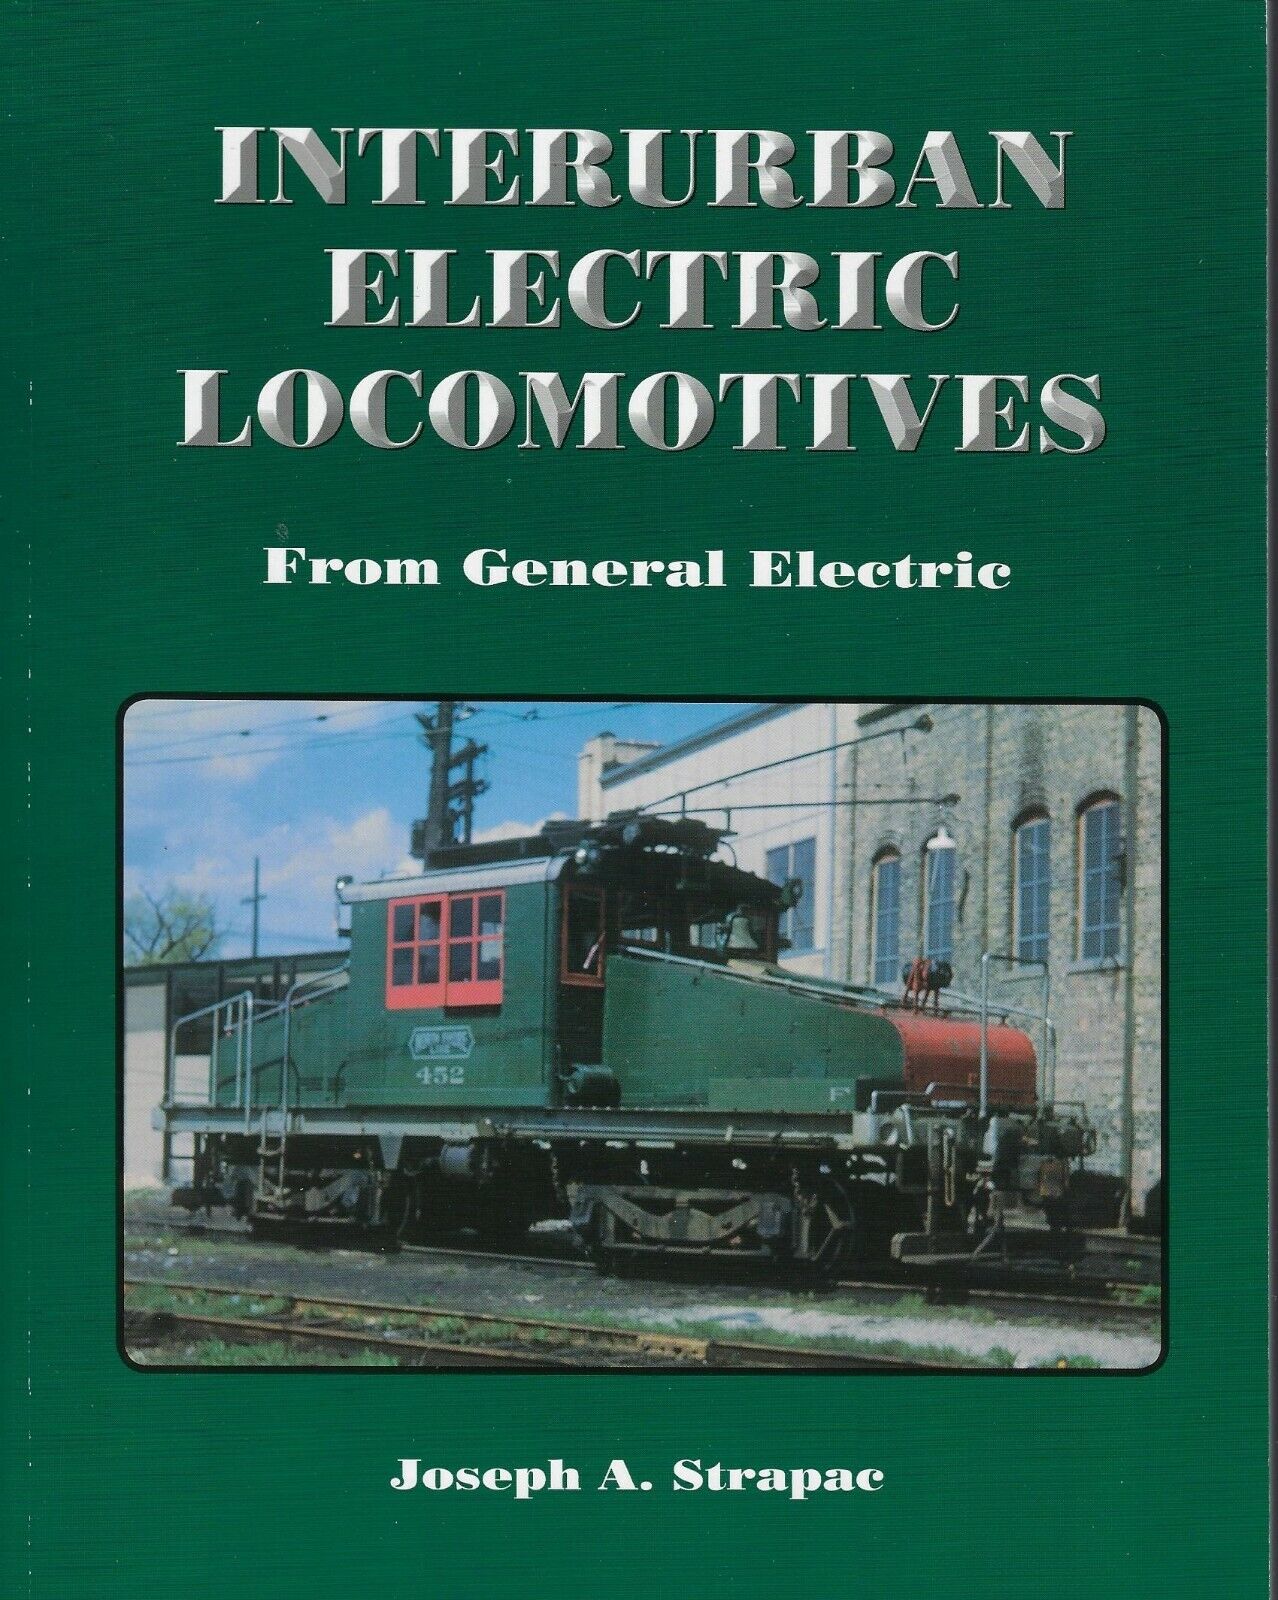 Interurban Electric Locomotives From GENERAL ELECTRIC - (Out of Print NEW BOOK)